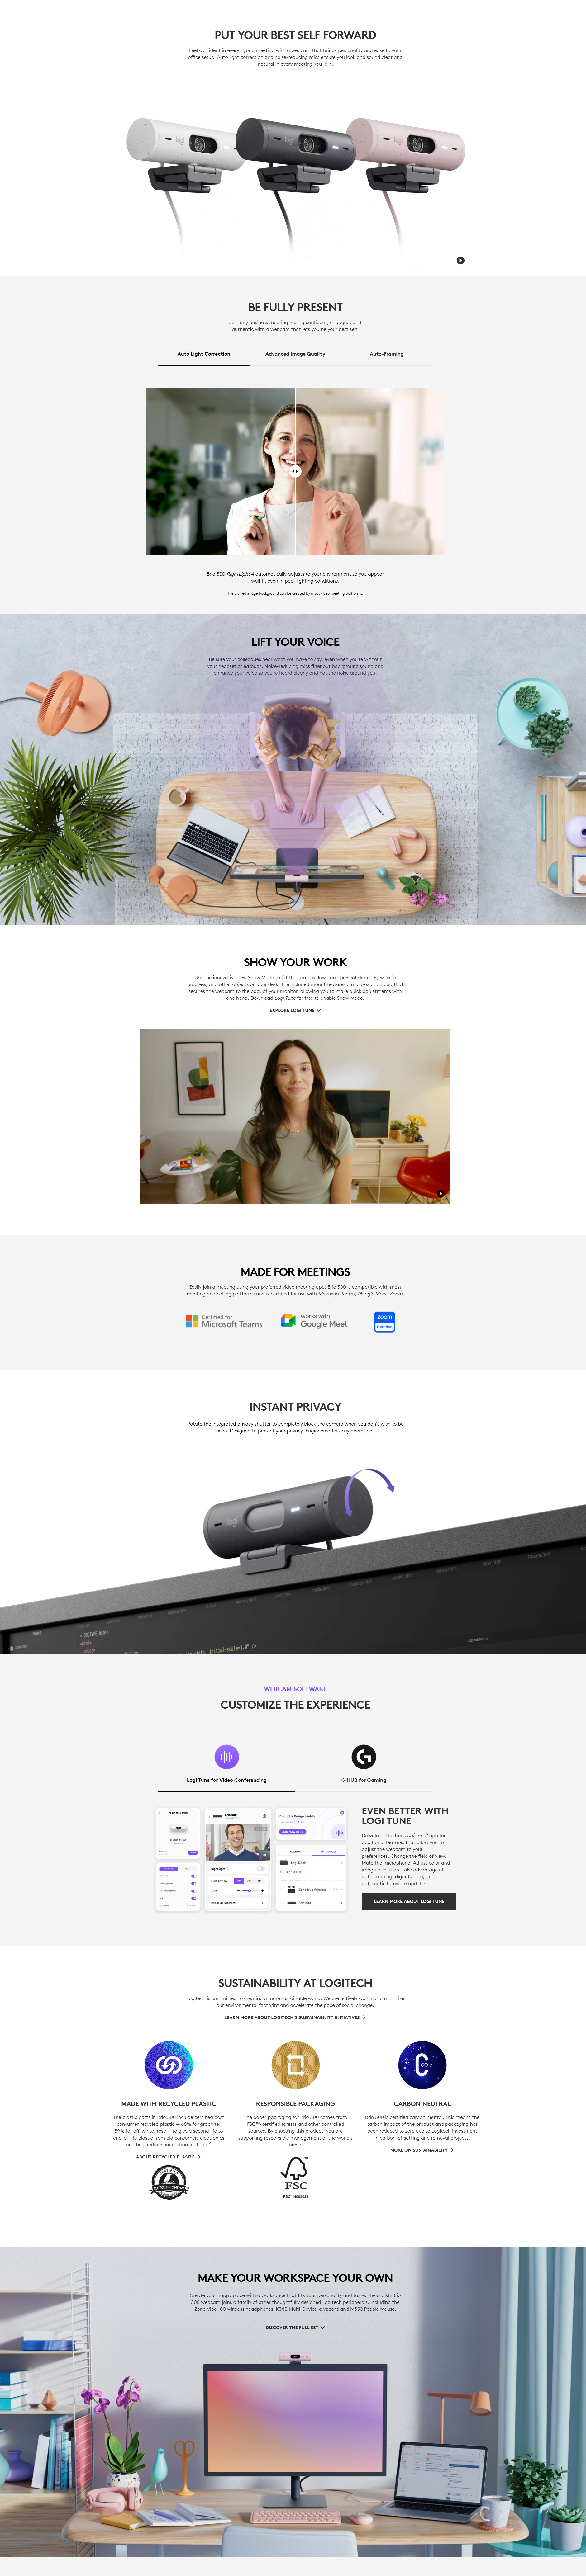 A large marketing image providing additional information about the product Logitech Brio 500 - 1080p60 Full HD Webcam (Off White) - Additional alt info not provided